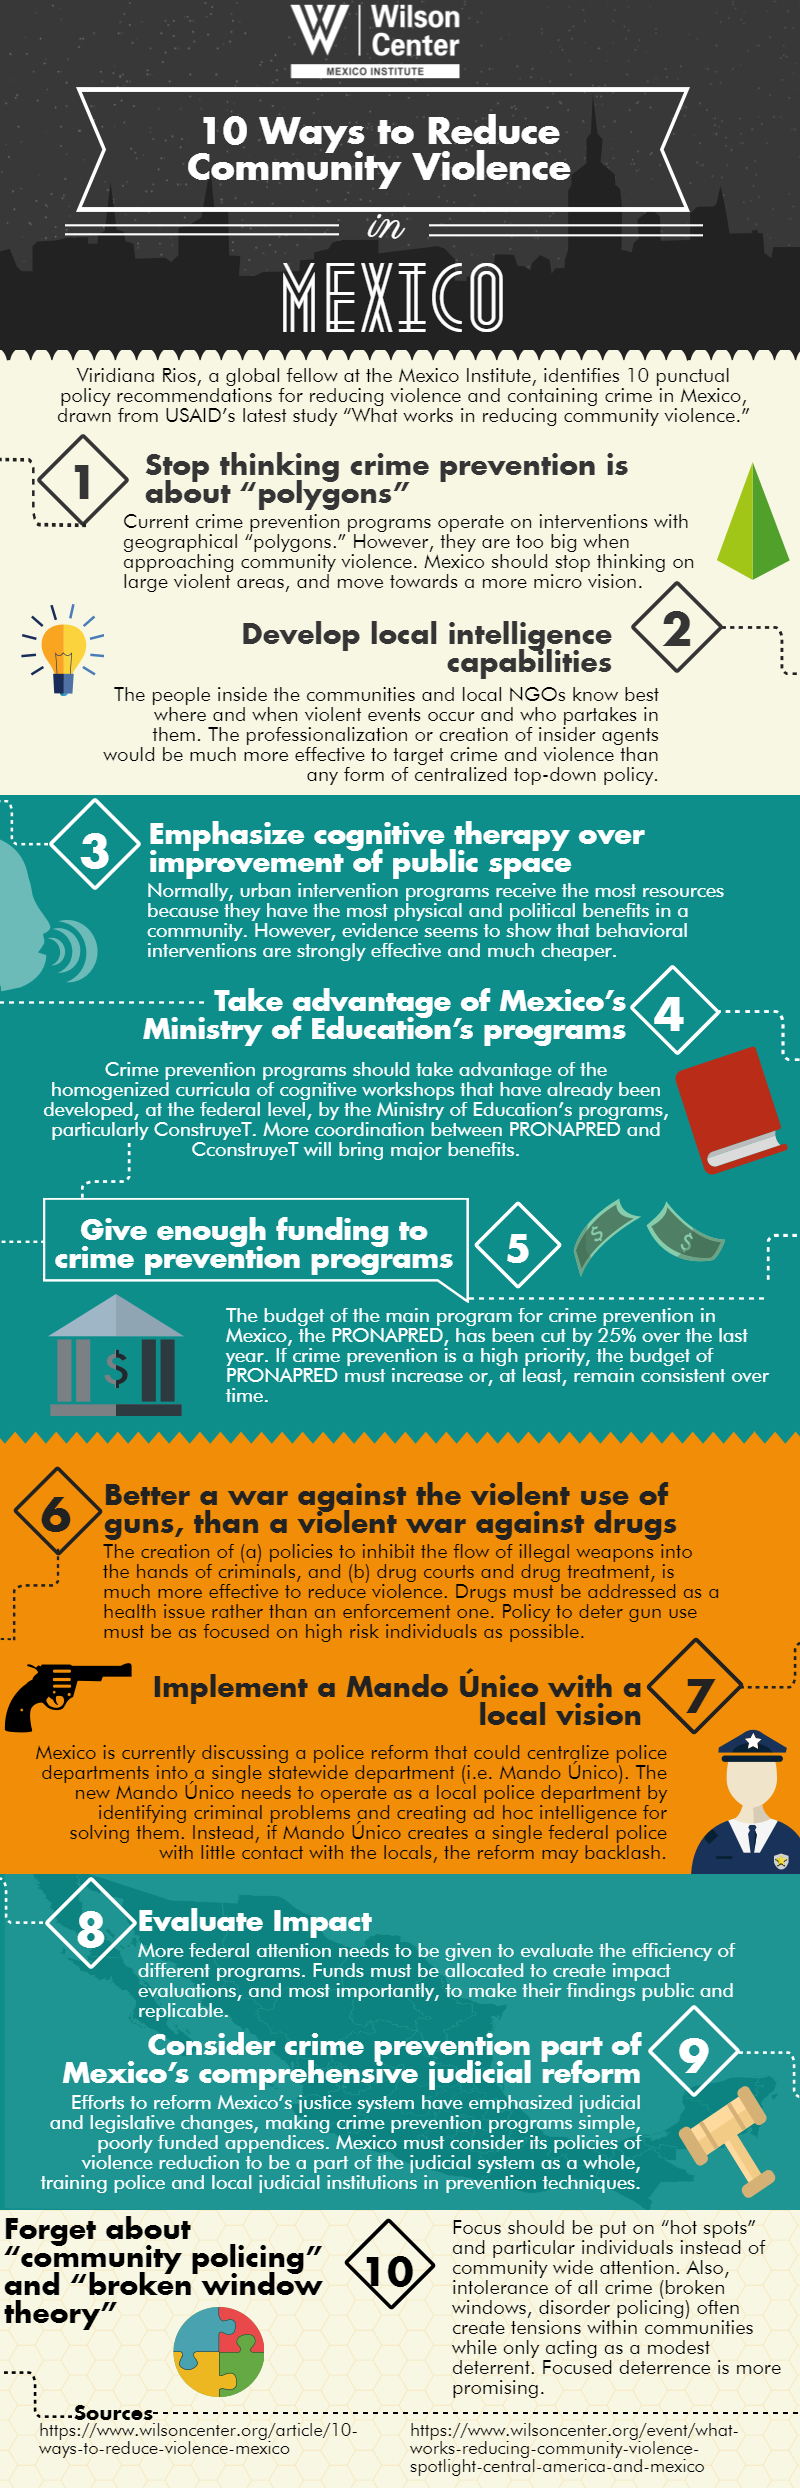 Infographic | 10 Ways to Reduce Community Violence in Mexico